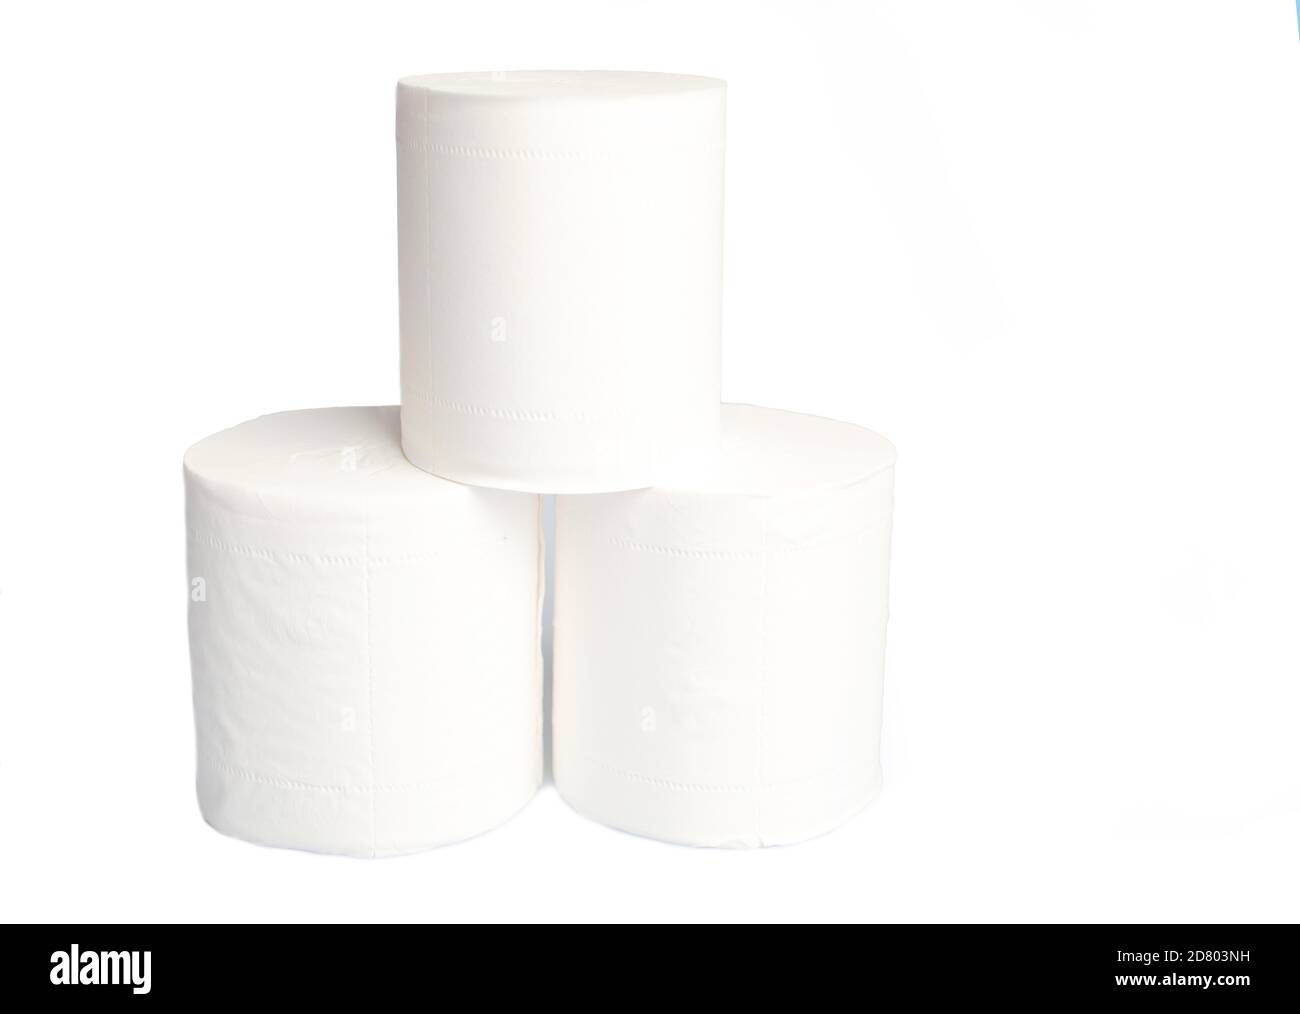 Toilet paper stands alone on a white background Stock Photo